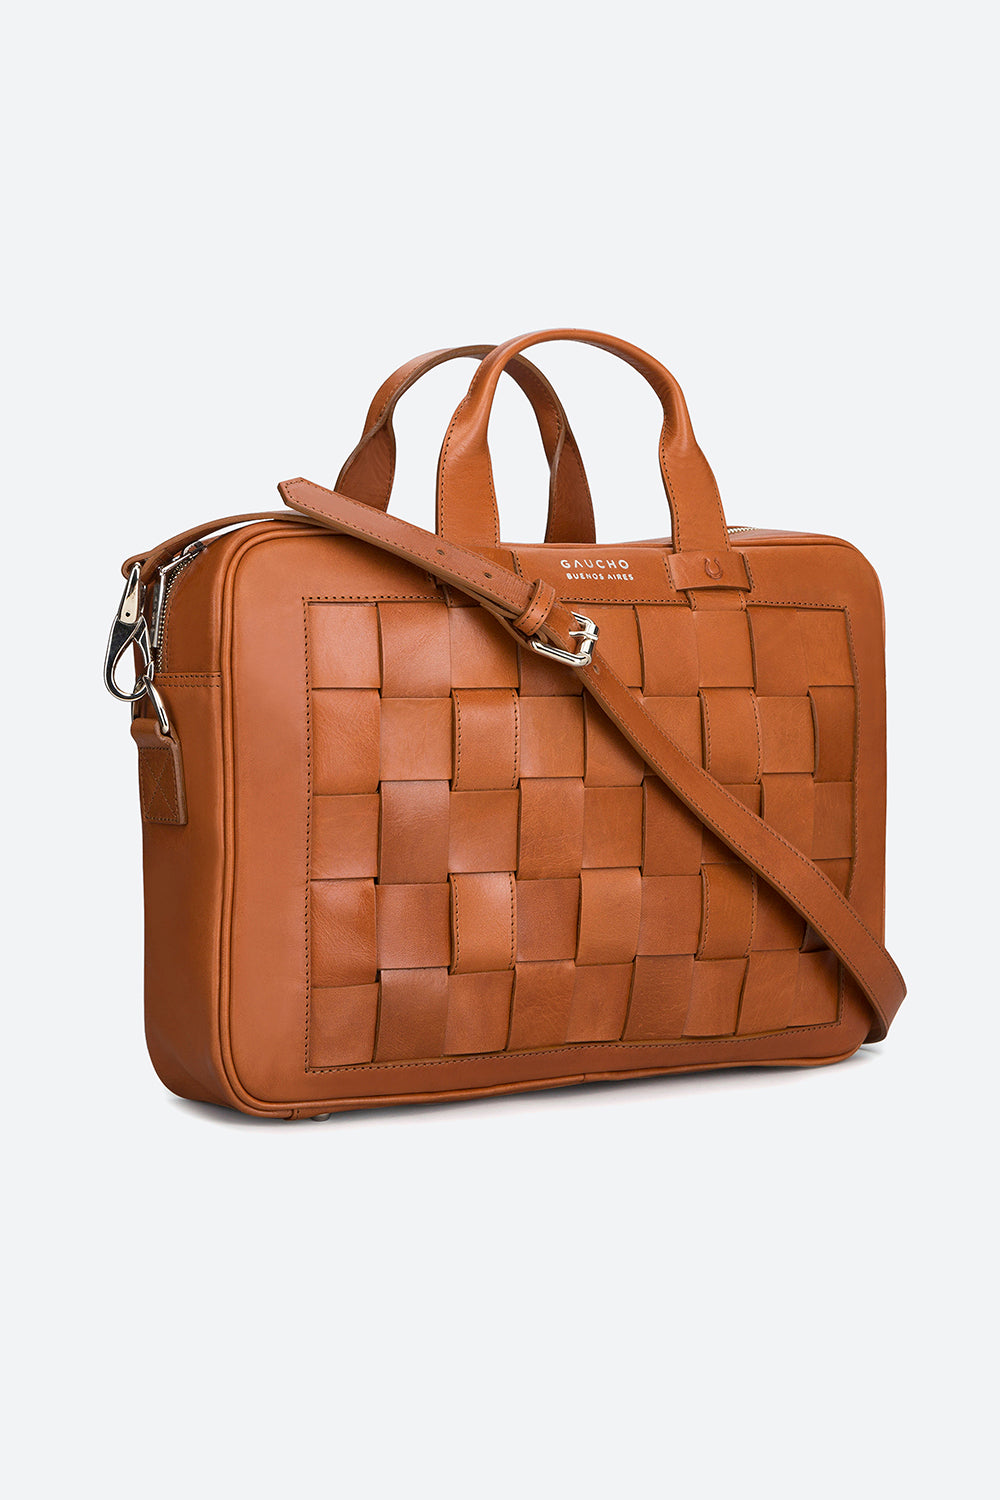 Tilcara Hand-Braided Briefcase in Tan